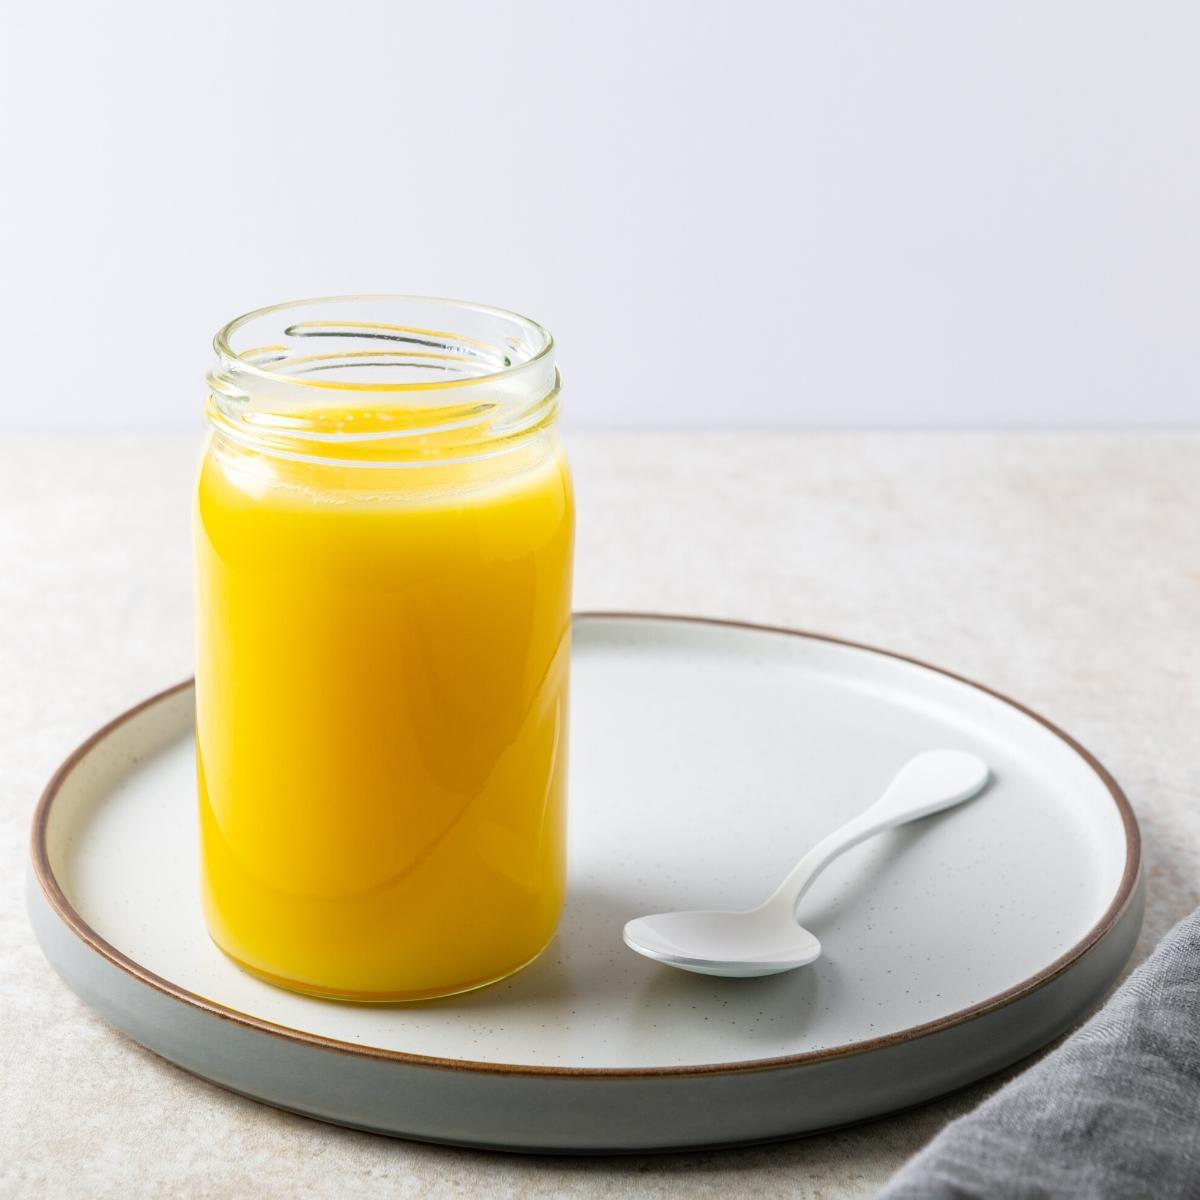 a jar of ghee aka clarified butter resting on a ceramic plate next to a silver spoon.